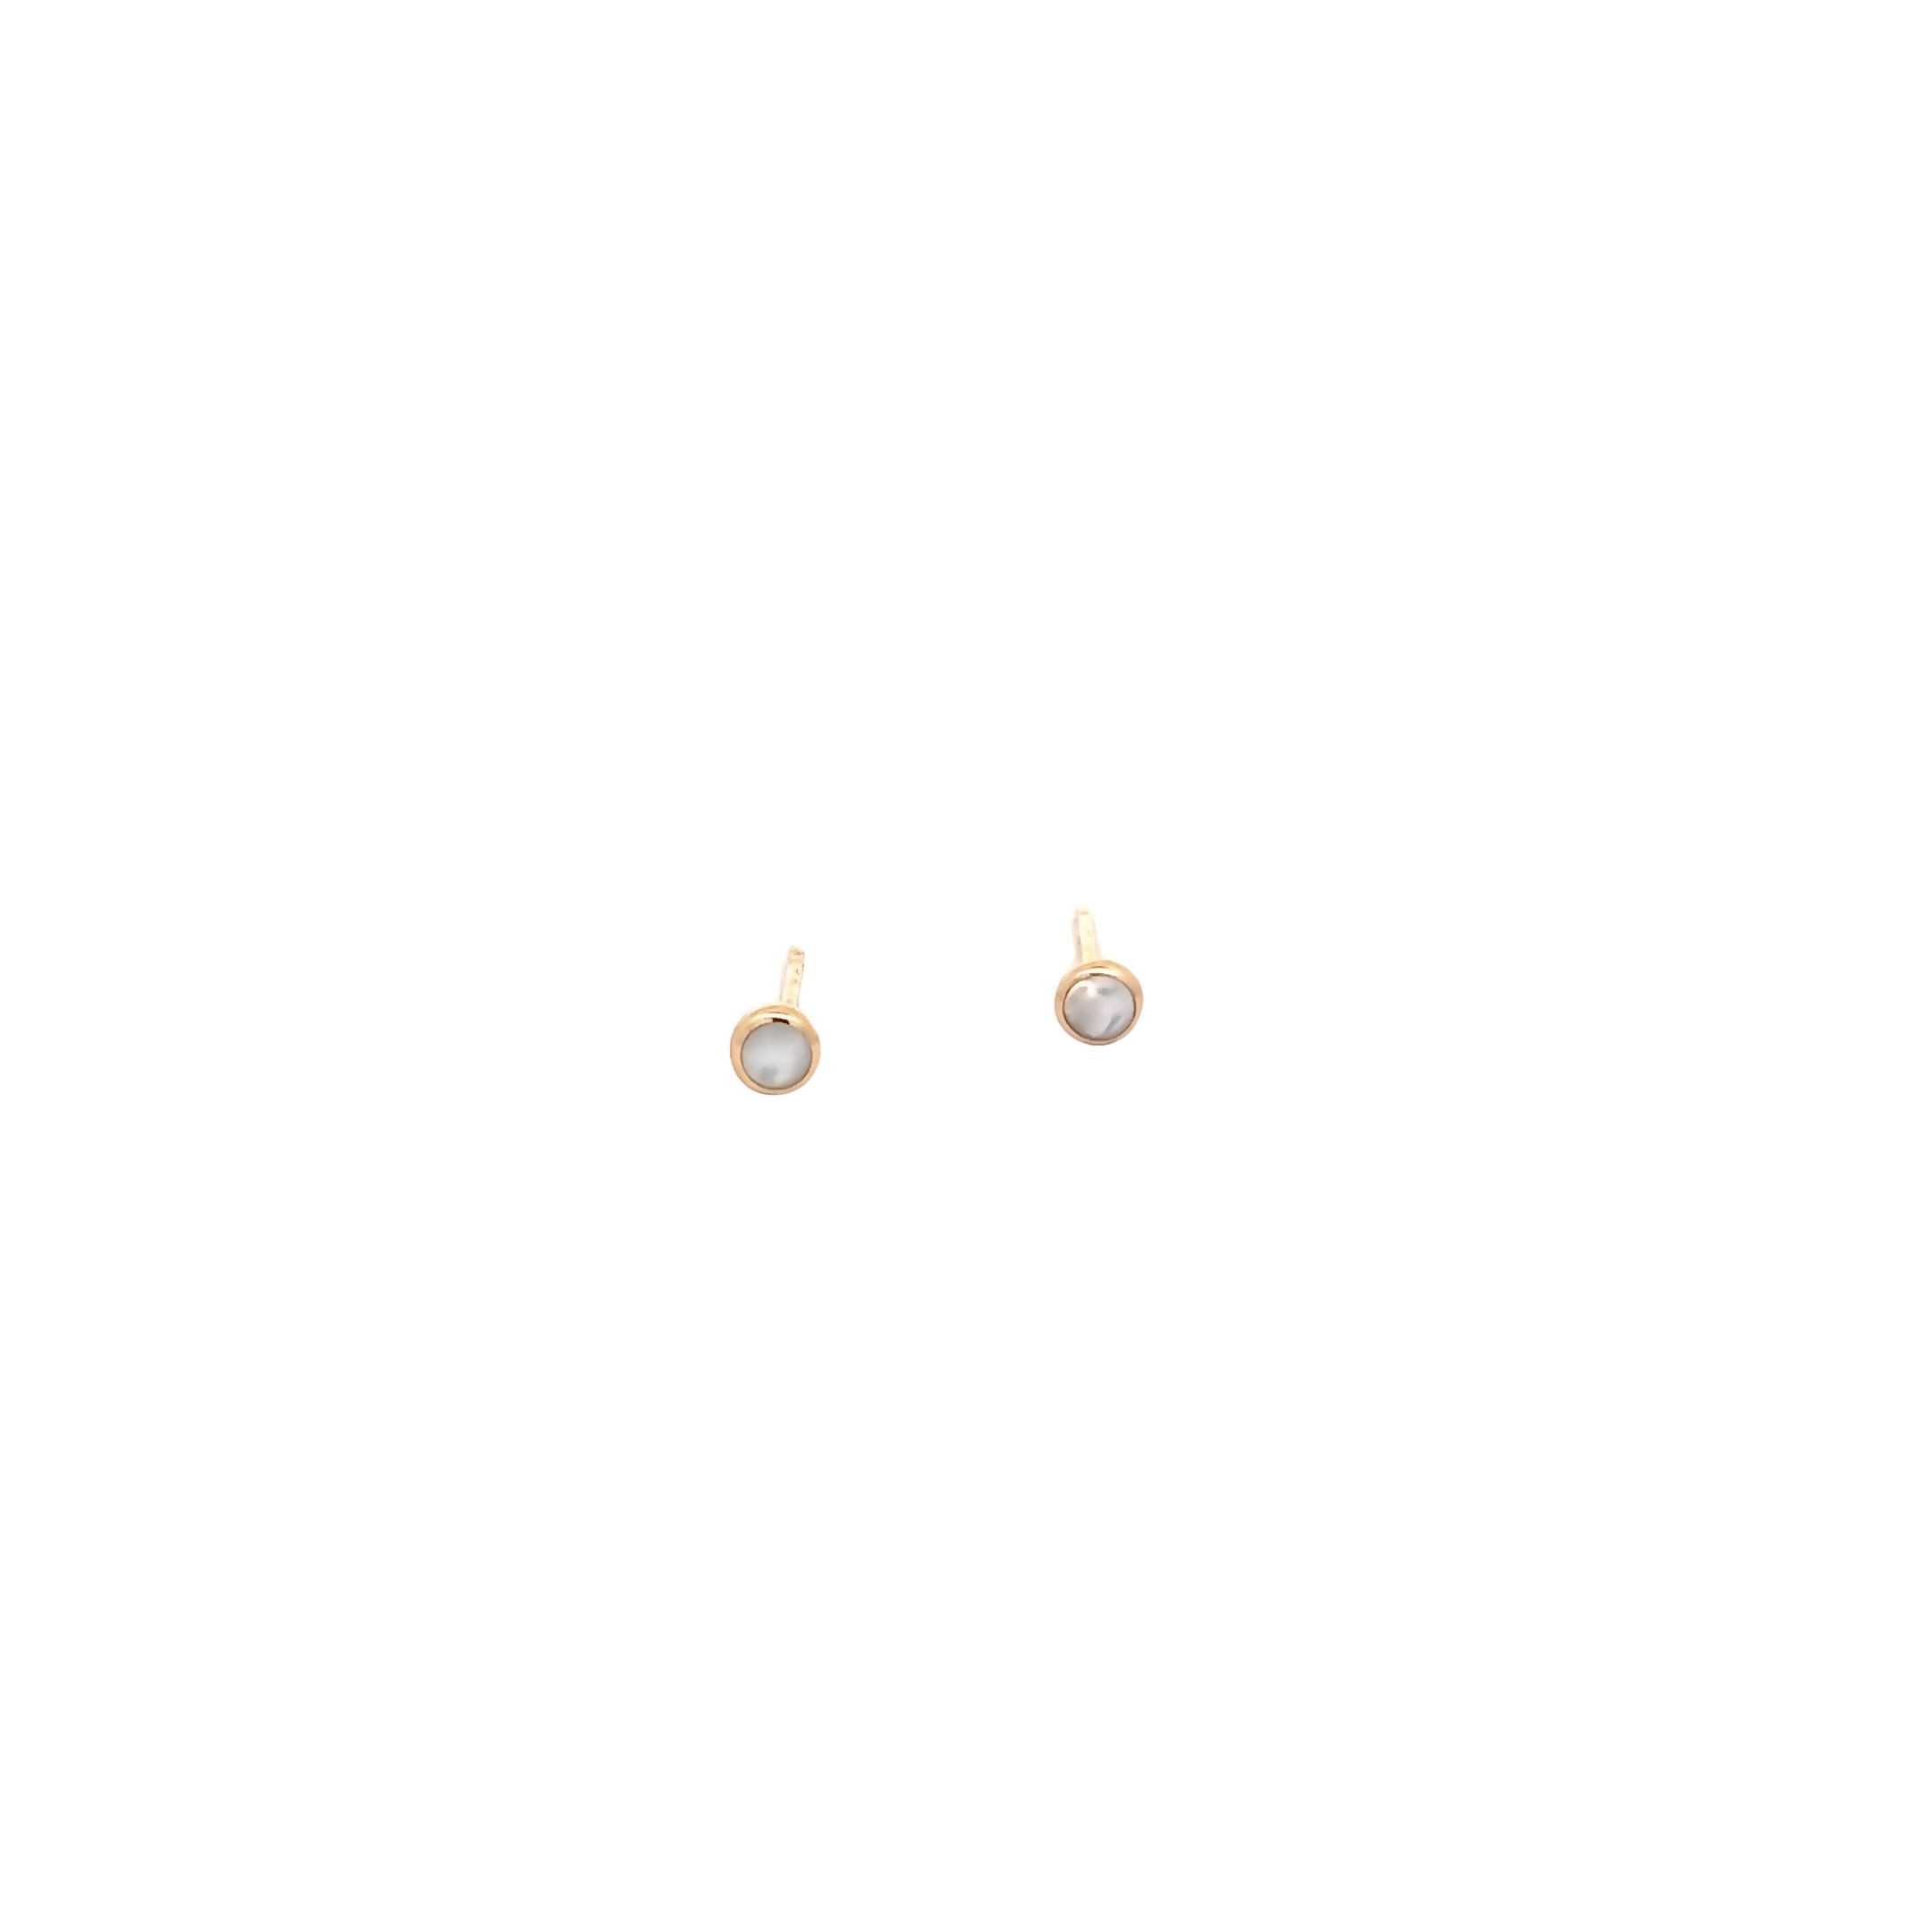 14 Karat yellow gold stud earrings with white Mother of Pearl inlay.